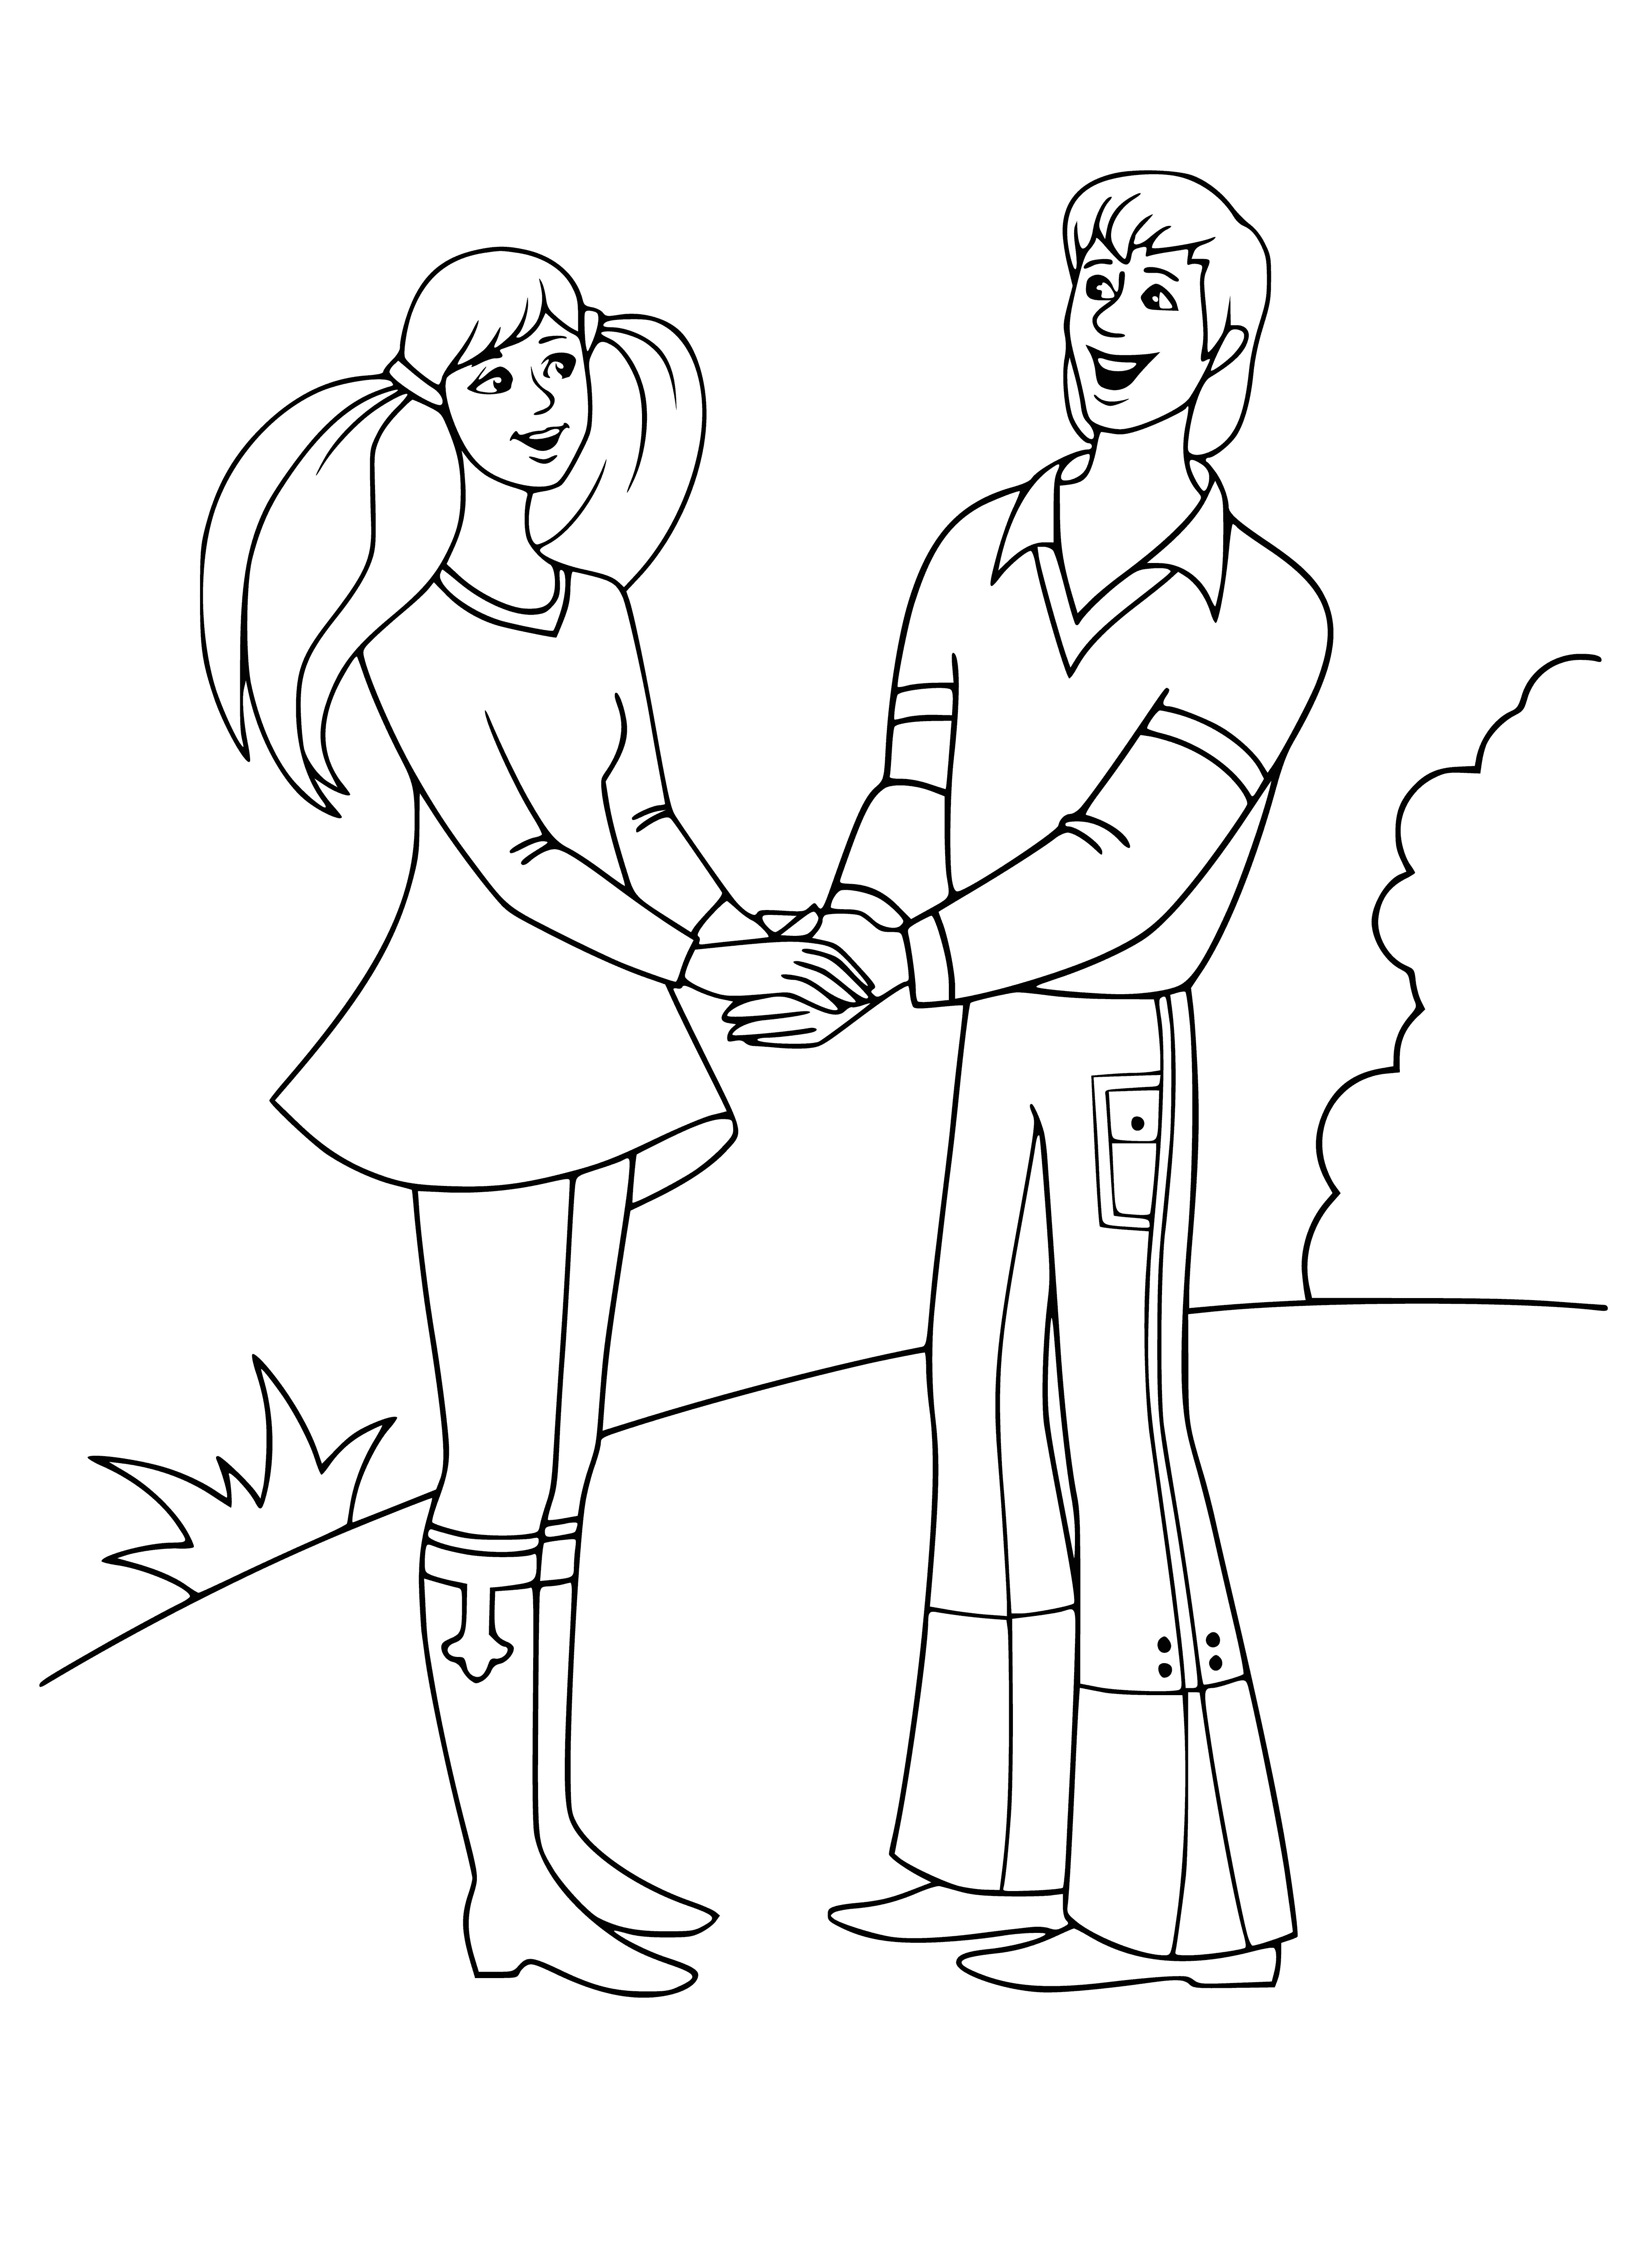 coloring page: Princess & Troubadour play classical & electric music together; both happily creating joyful music.